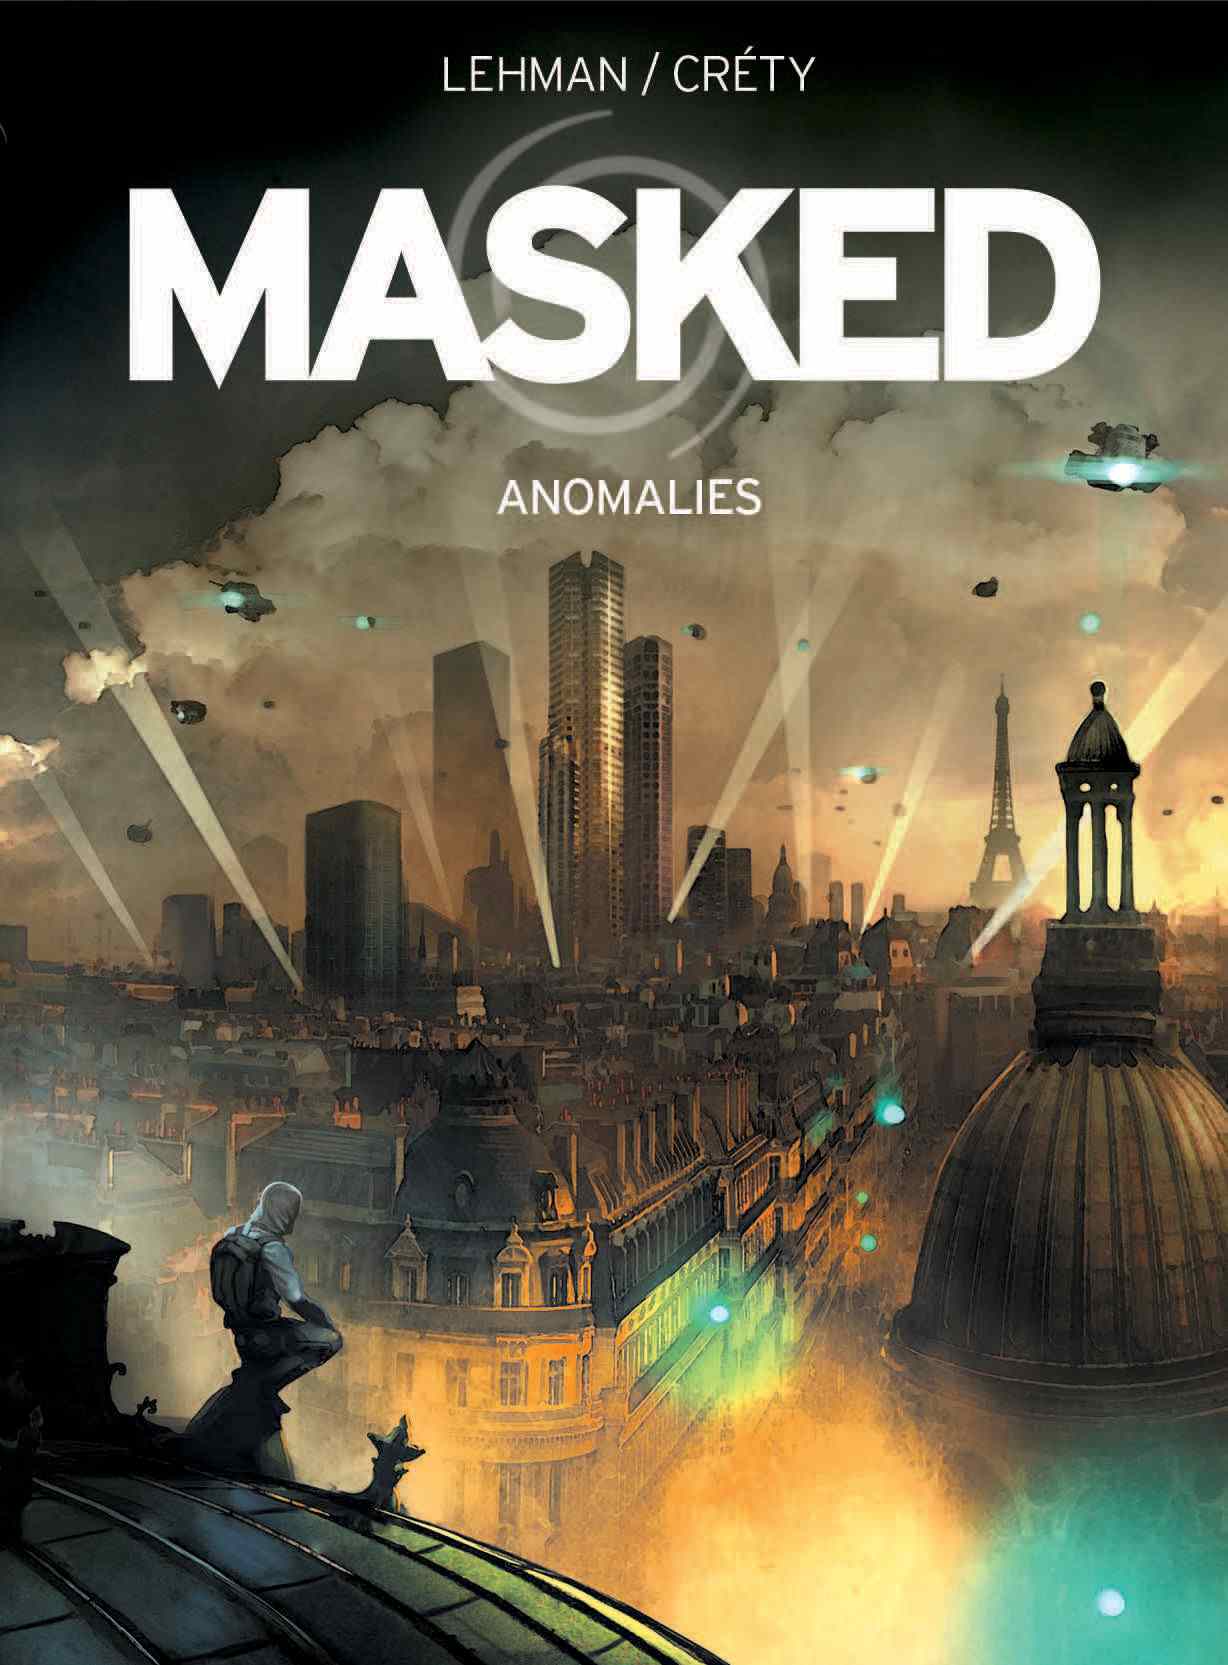 Masked Cover